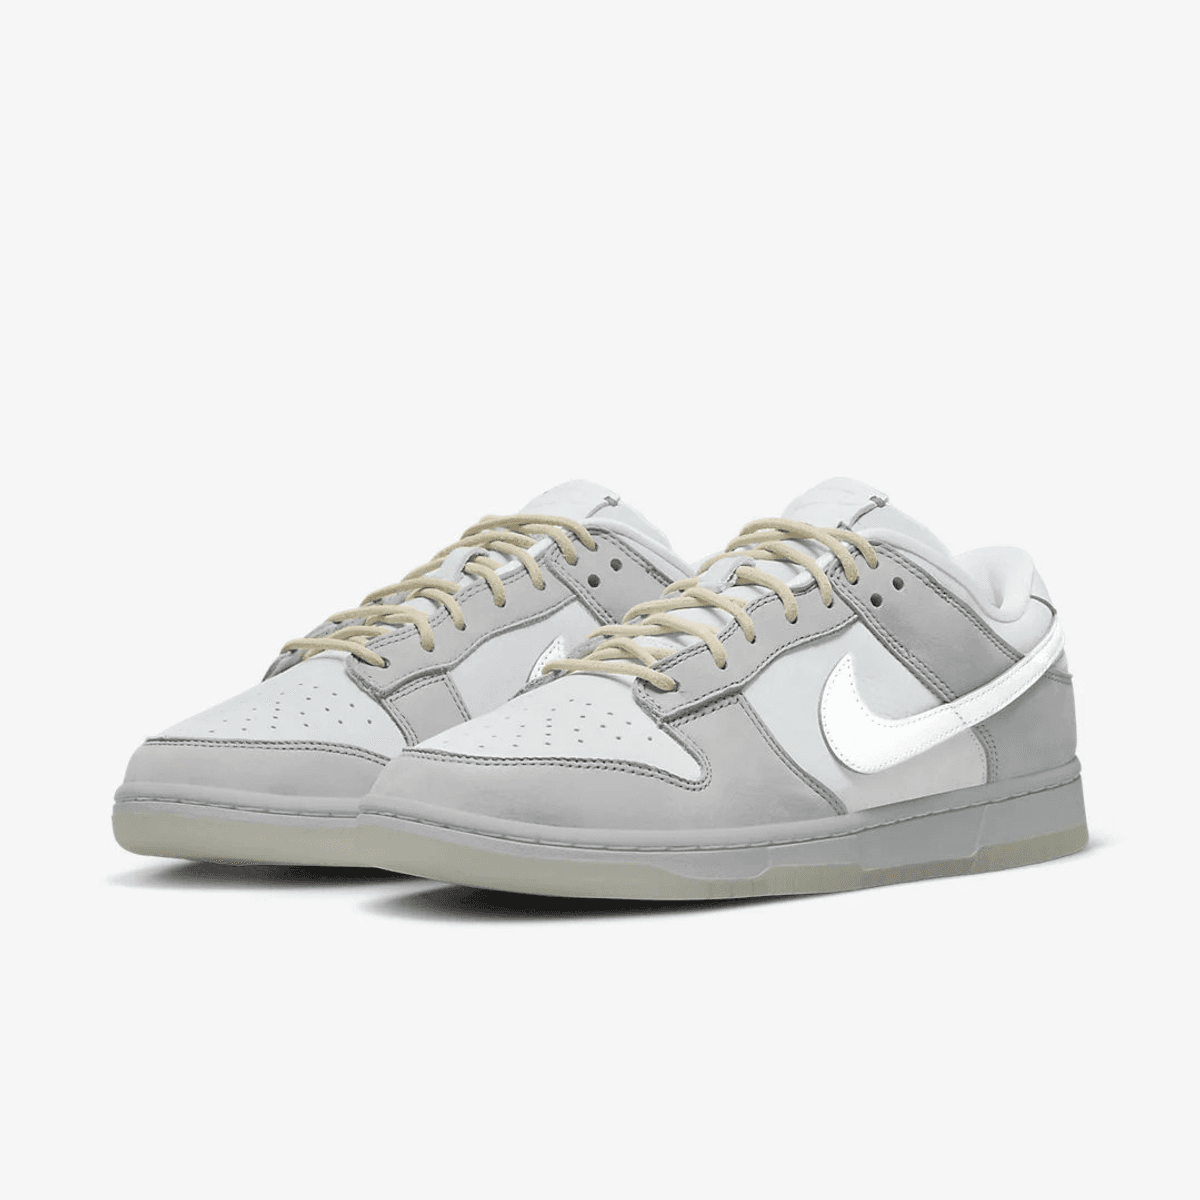 The Nike Dunk Takeover Continues With The Nike Dunk Low Wolf Grey/Pure Platinum